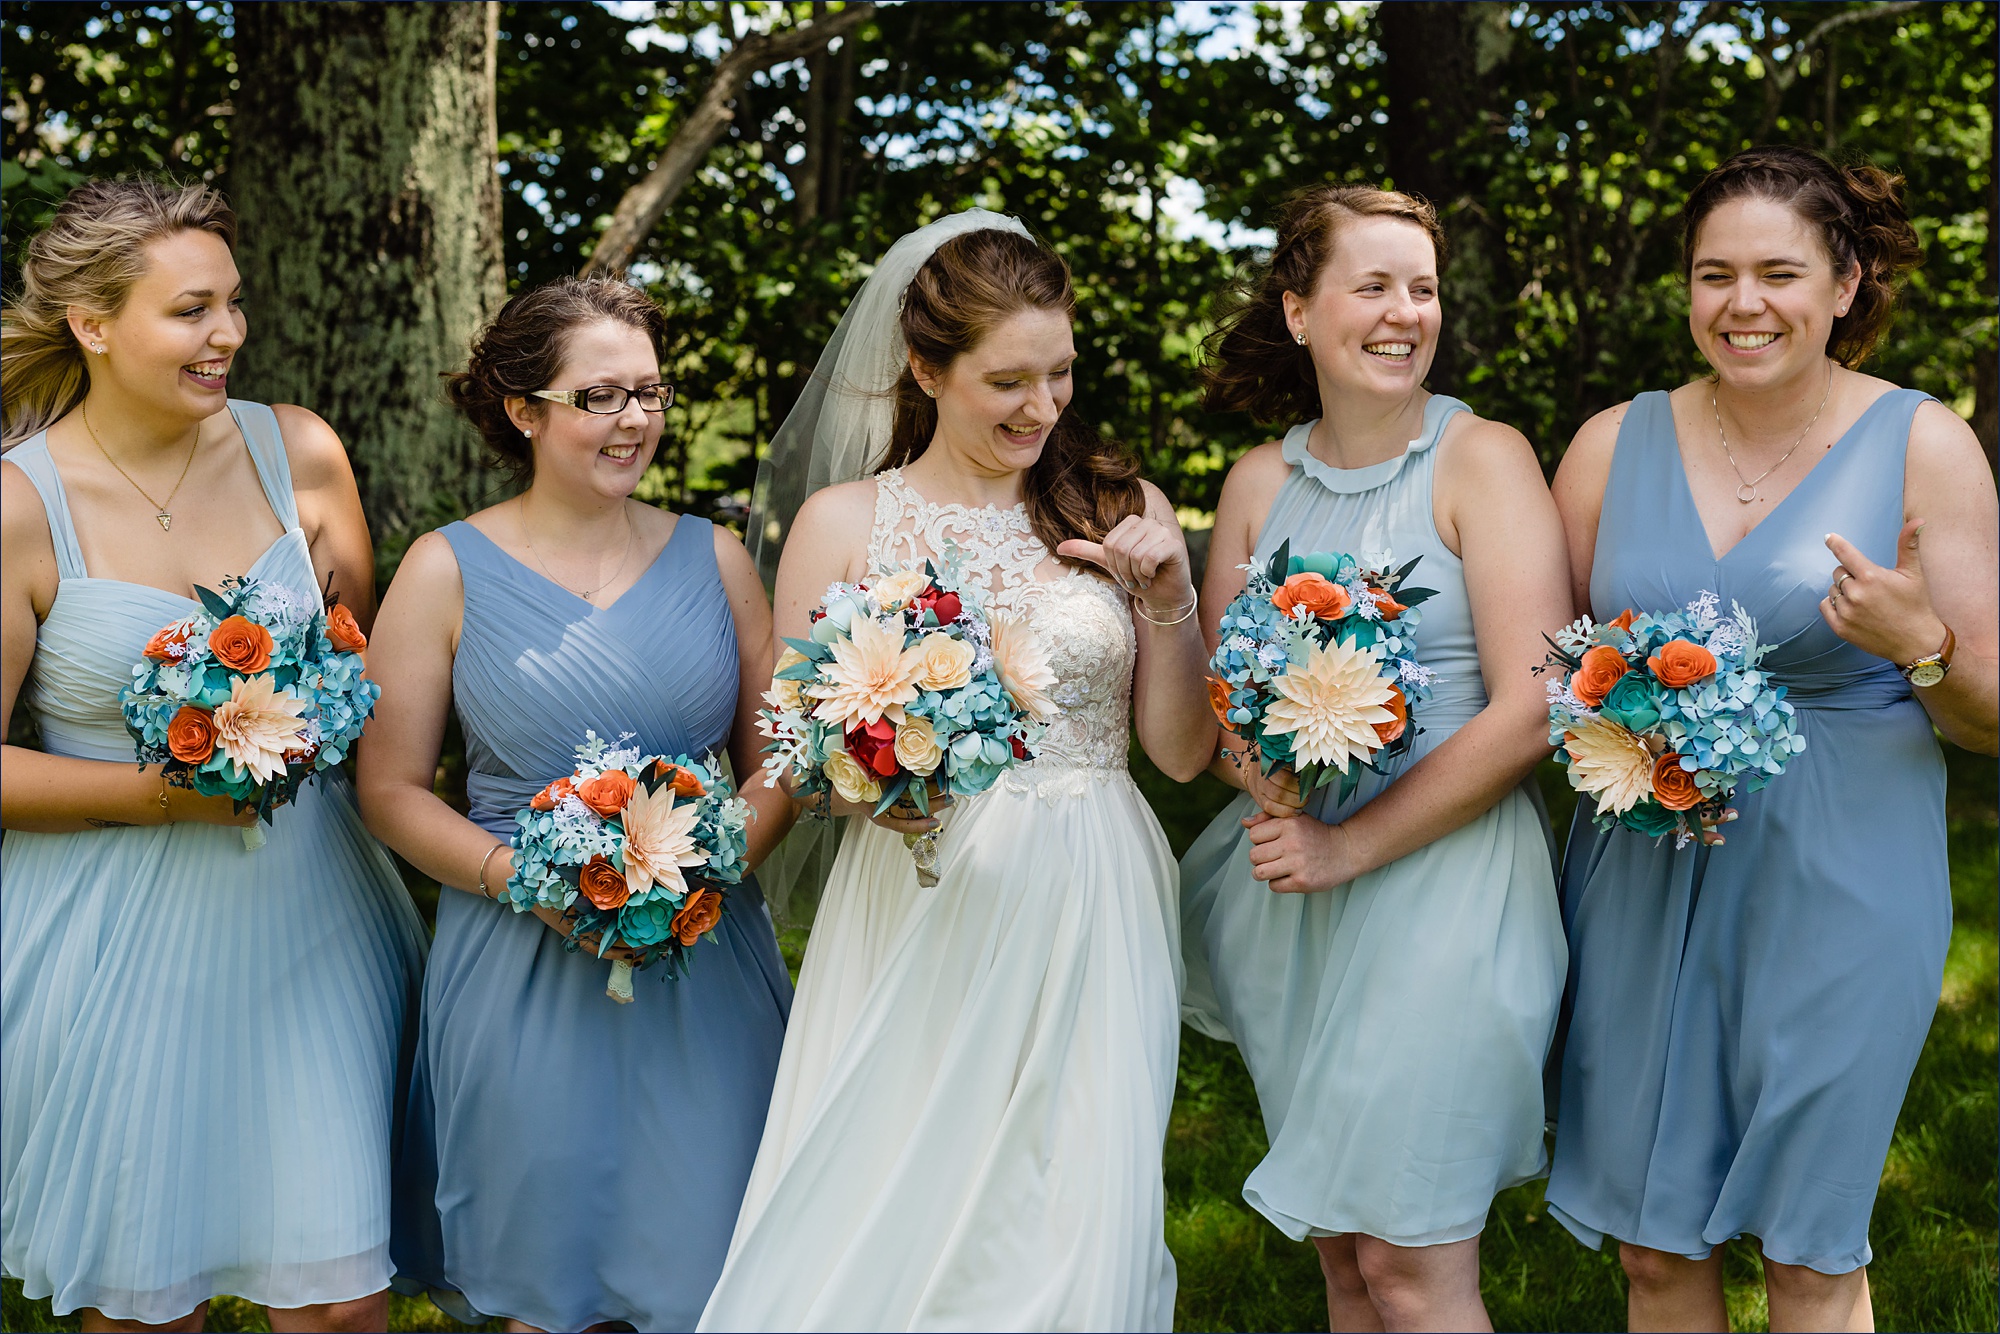 The bridesmaids and bride all laugh and get playful in the trees at Kitz Farm